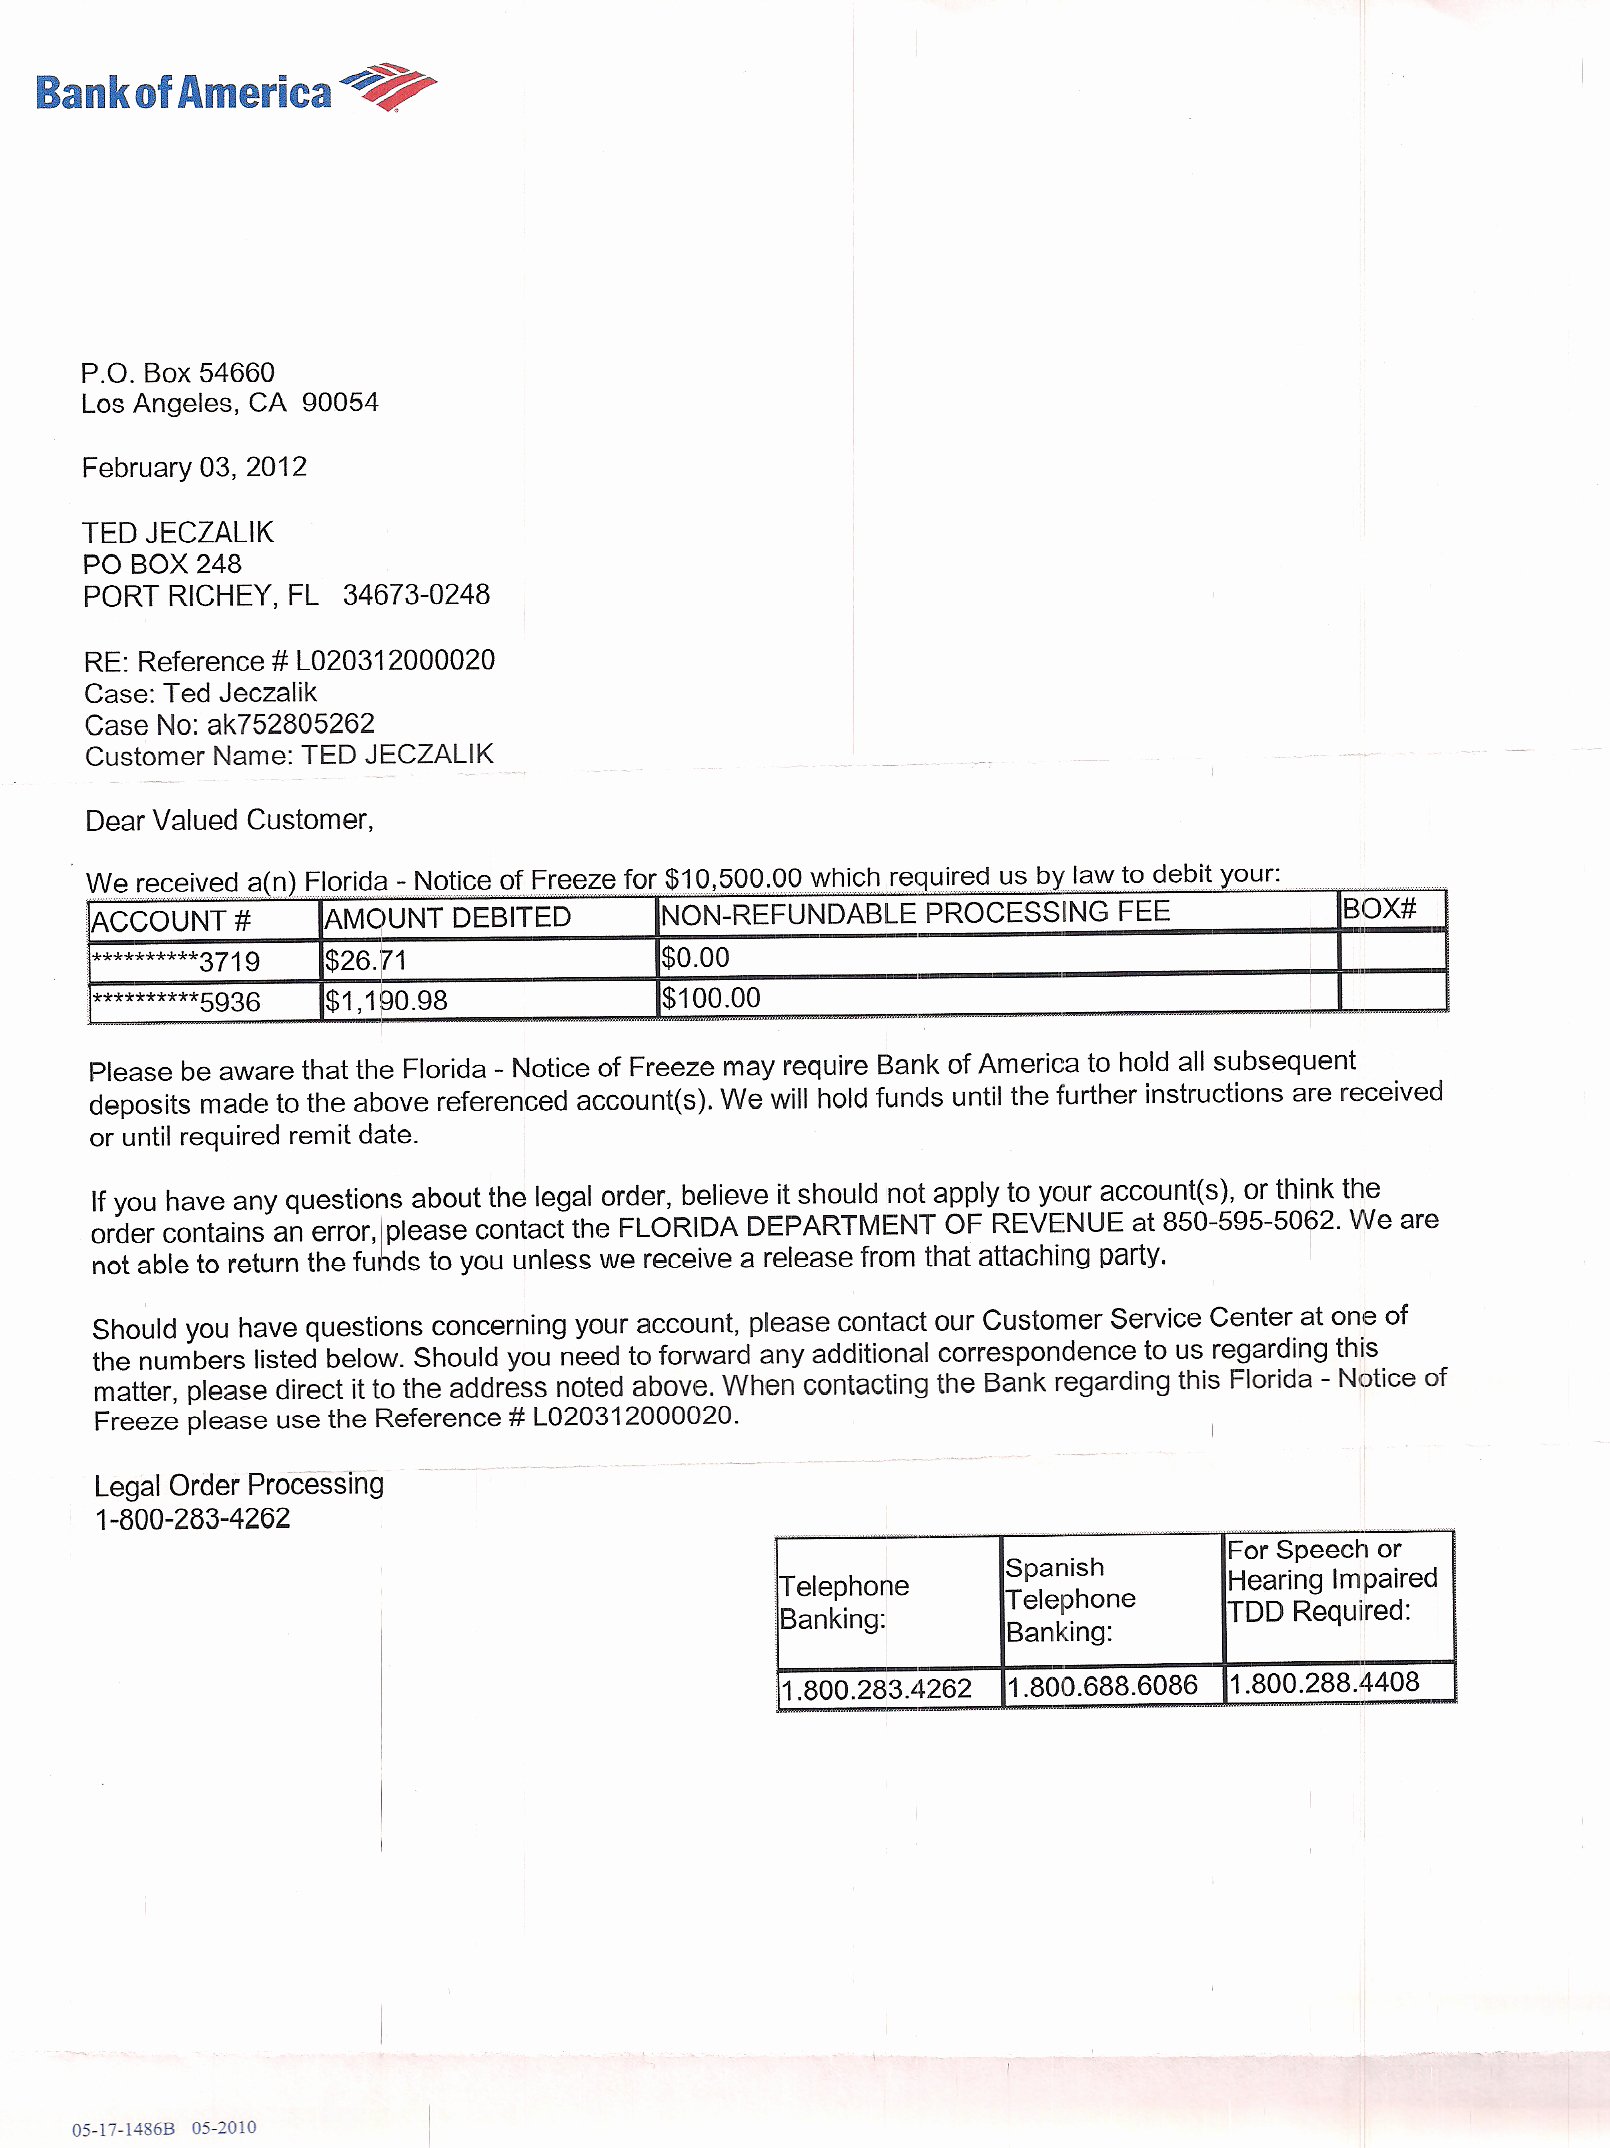 Chase Bank Proof Of Funds Letter Best Of Application Letter for Bank Account Statement Bank